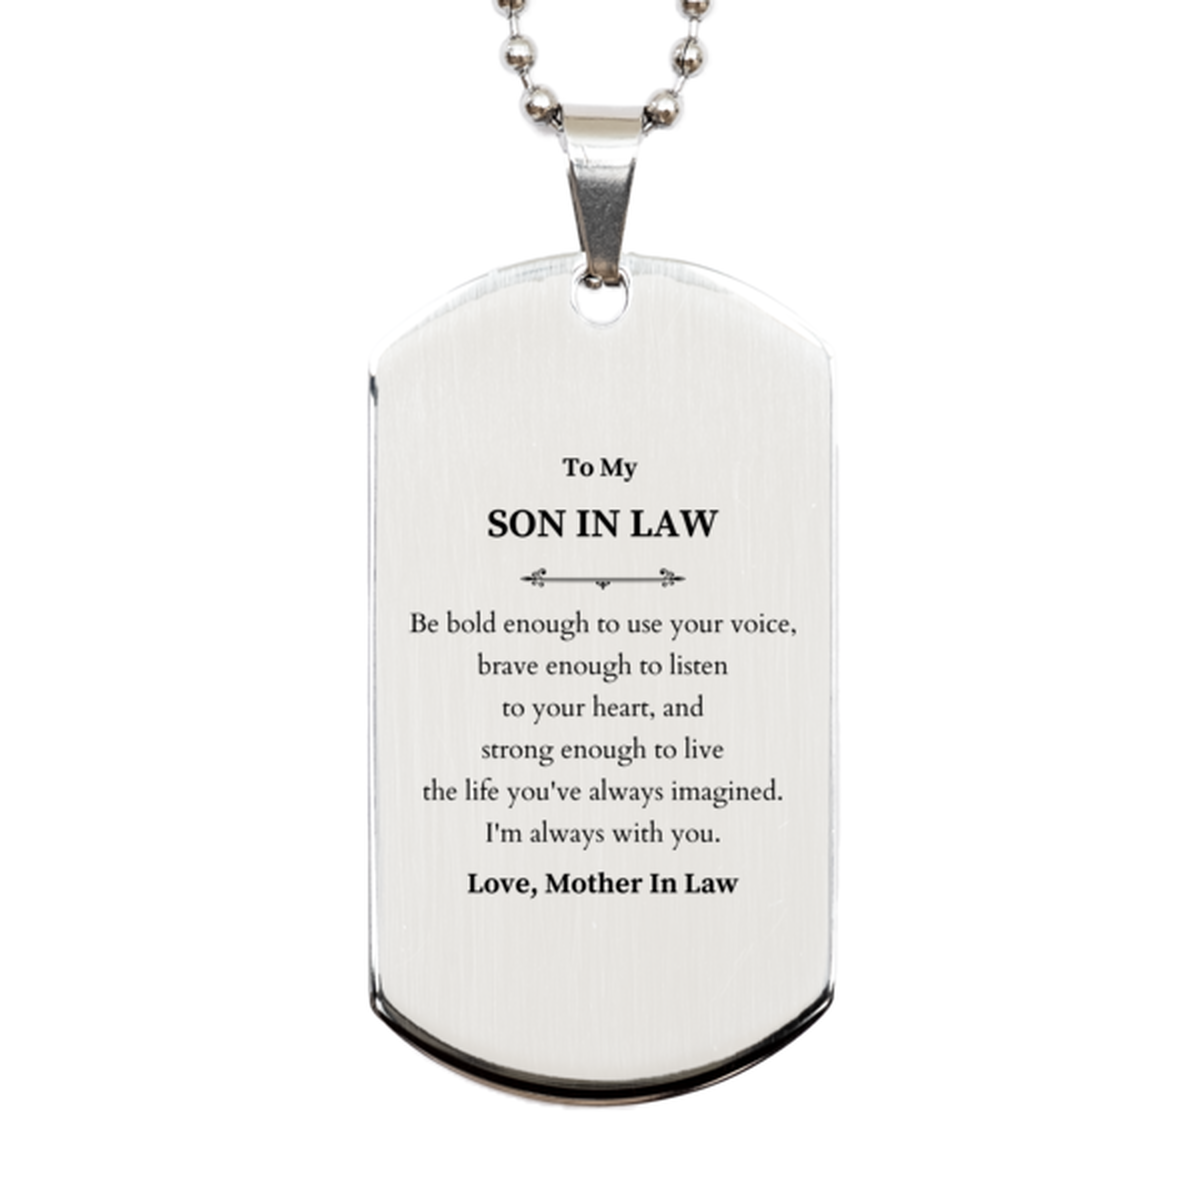 Keepsake Son In Law Silver Dog Tag Gift Idea Graduation Christmas Birthday Son In Law from Mother In Law, Son In Law Be bold enough to use your voice, brave enough to listen to your heart. Love, Mother In Law